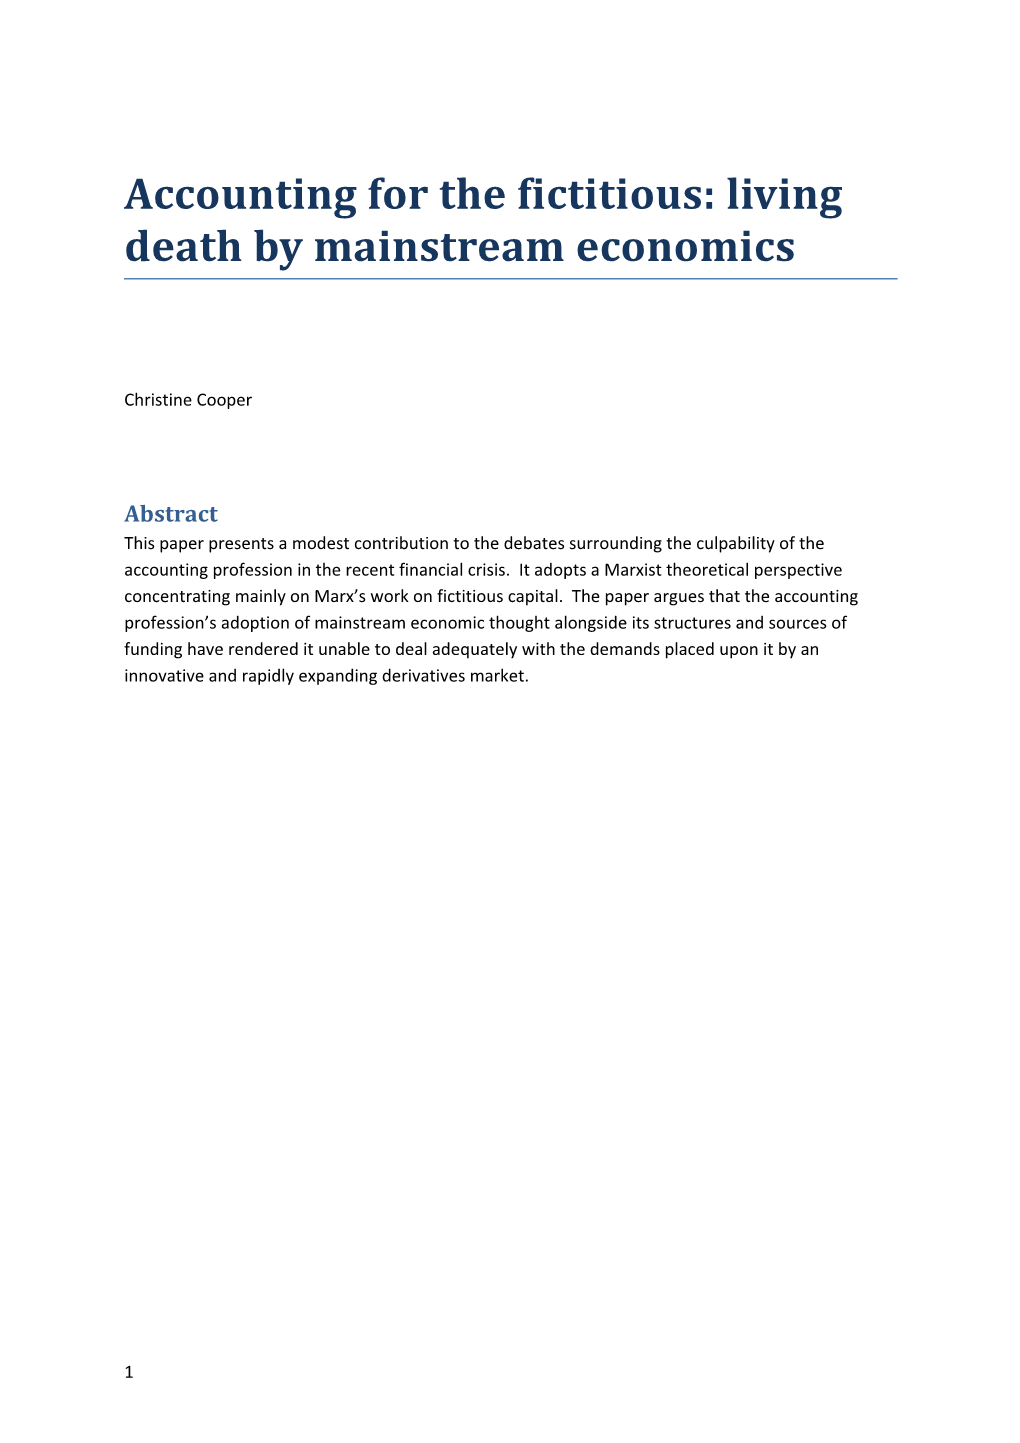 Accounting for the Fictitious: Living Death by Mainstream Economics